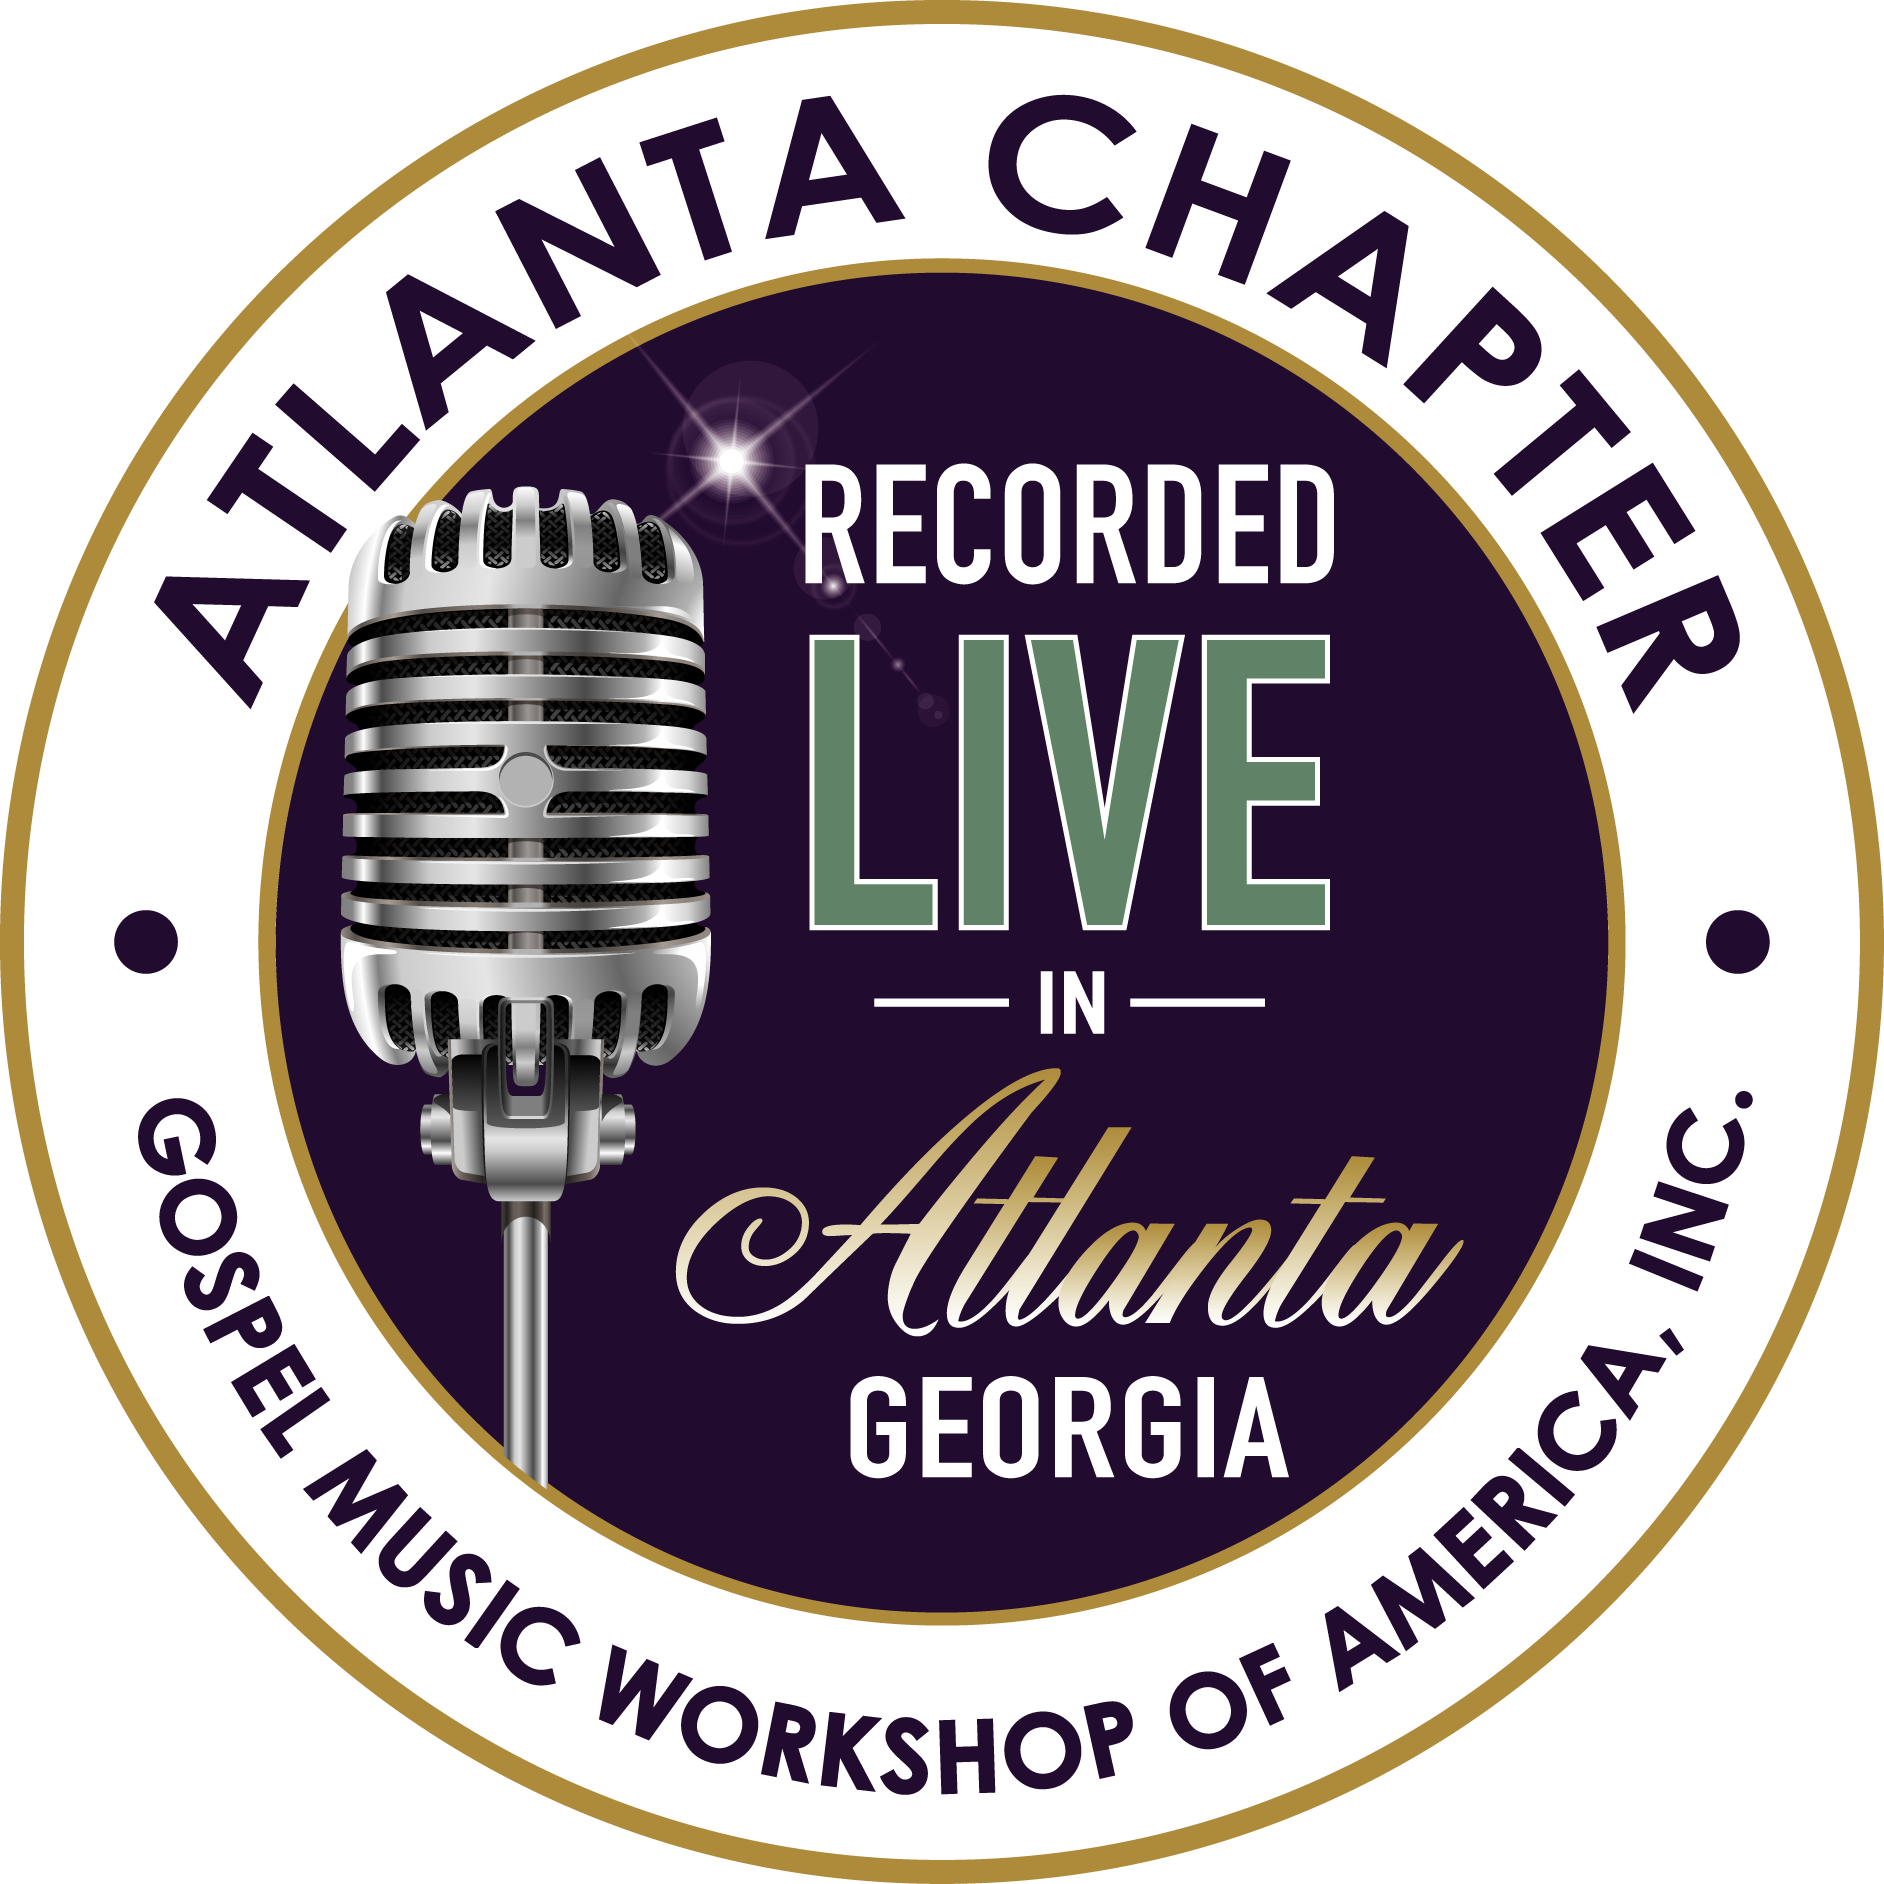 The Atlanta Chapter of the GMWA Mass Choir